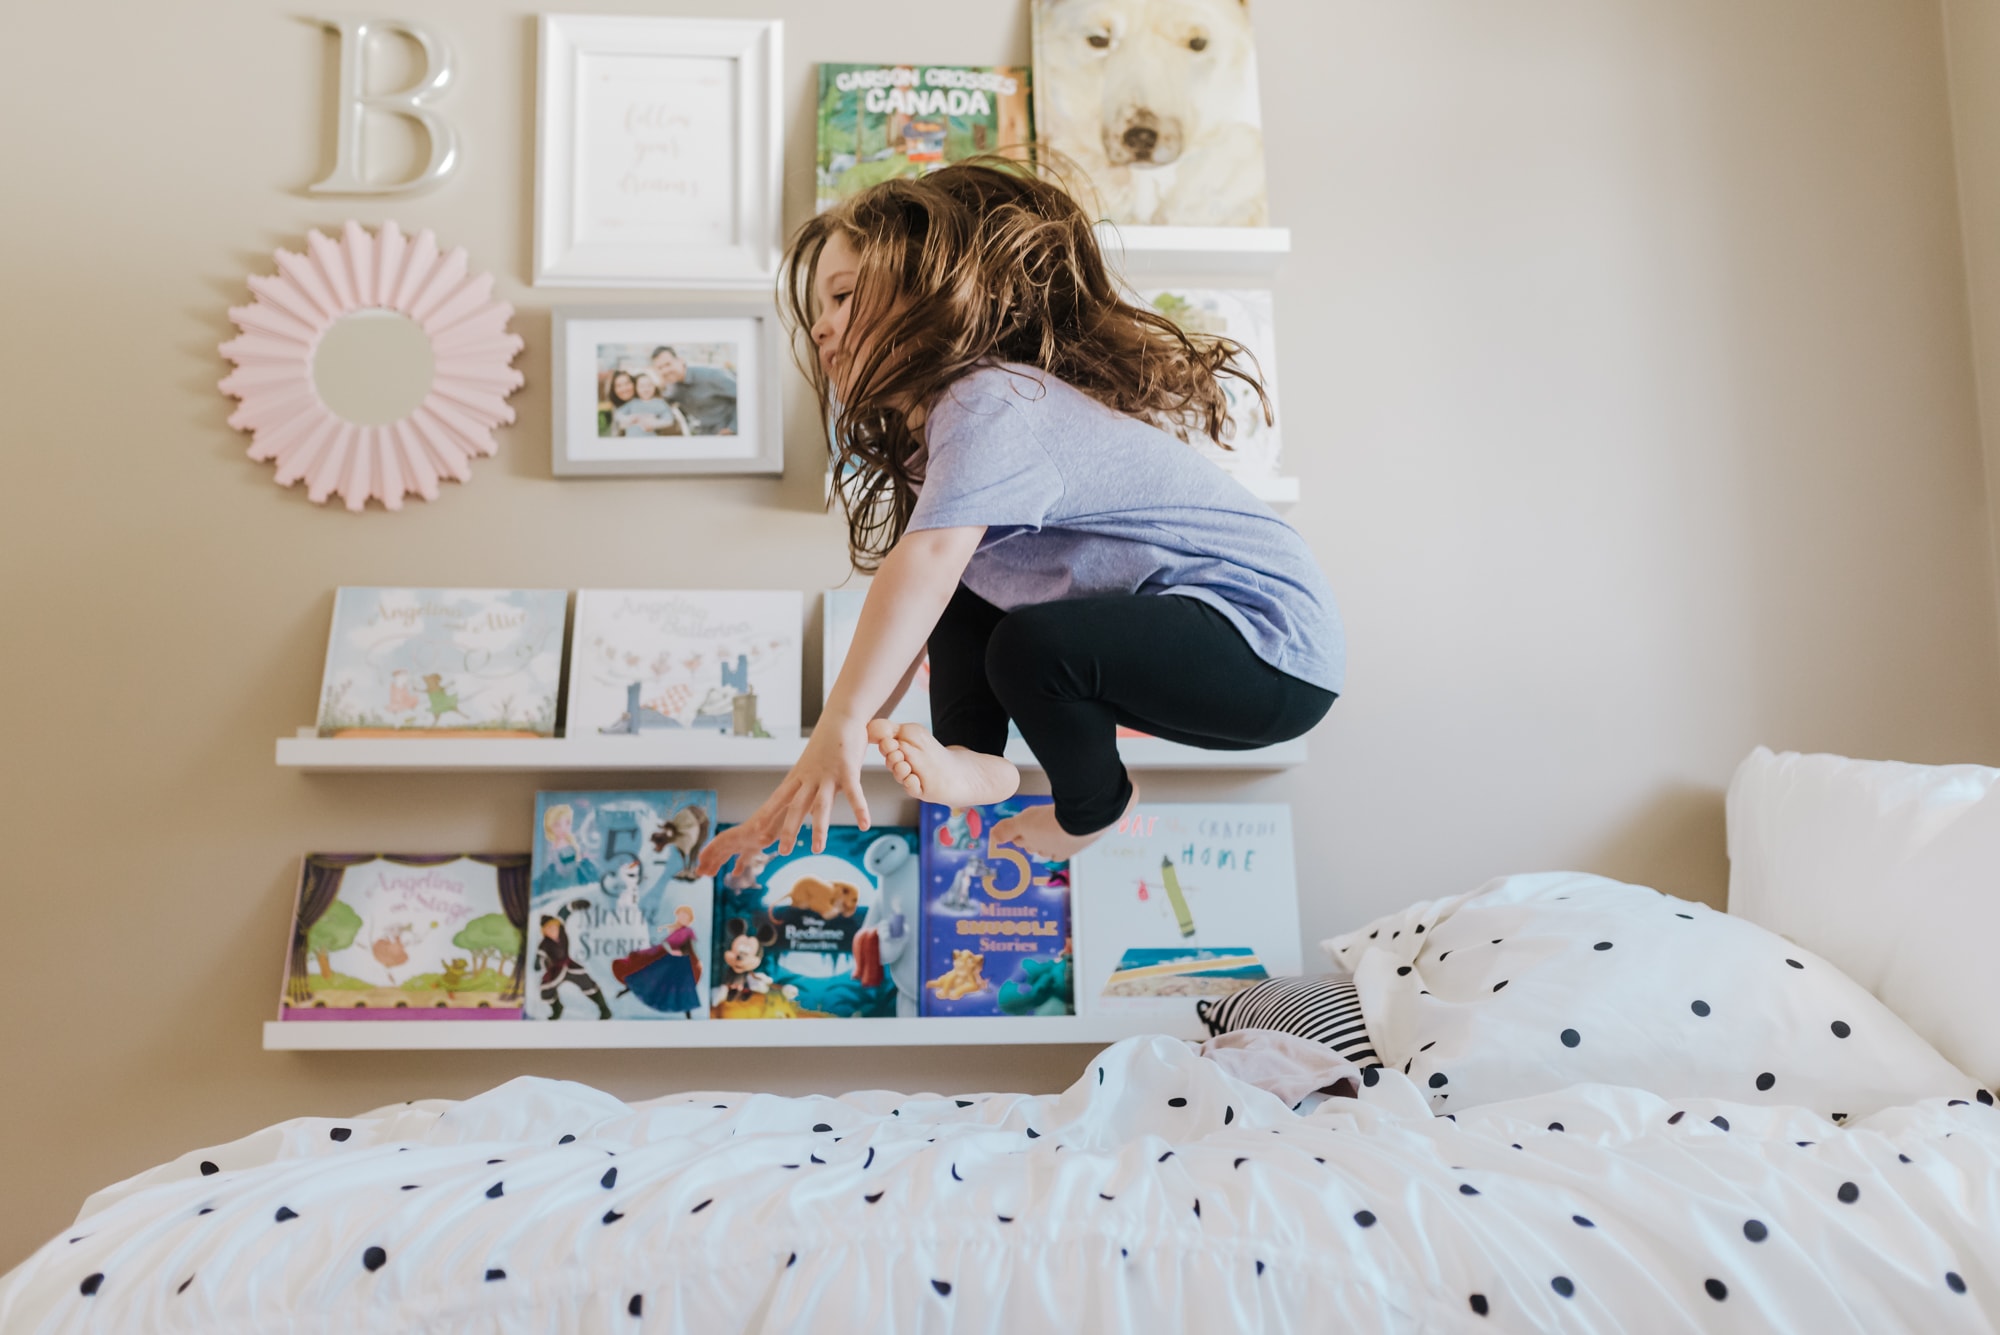 girl jumping on bed in bedroom with bookshelf displaying kids books during indoor family shoot